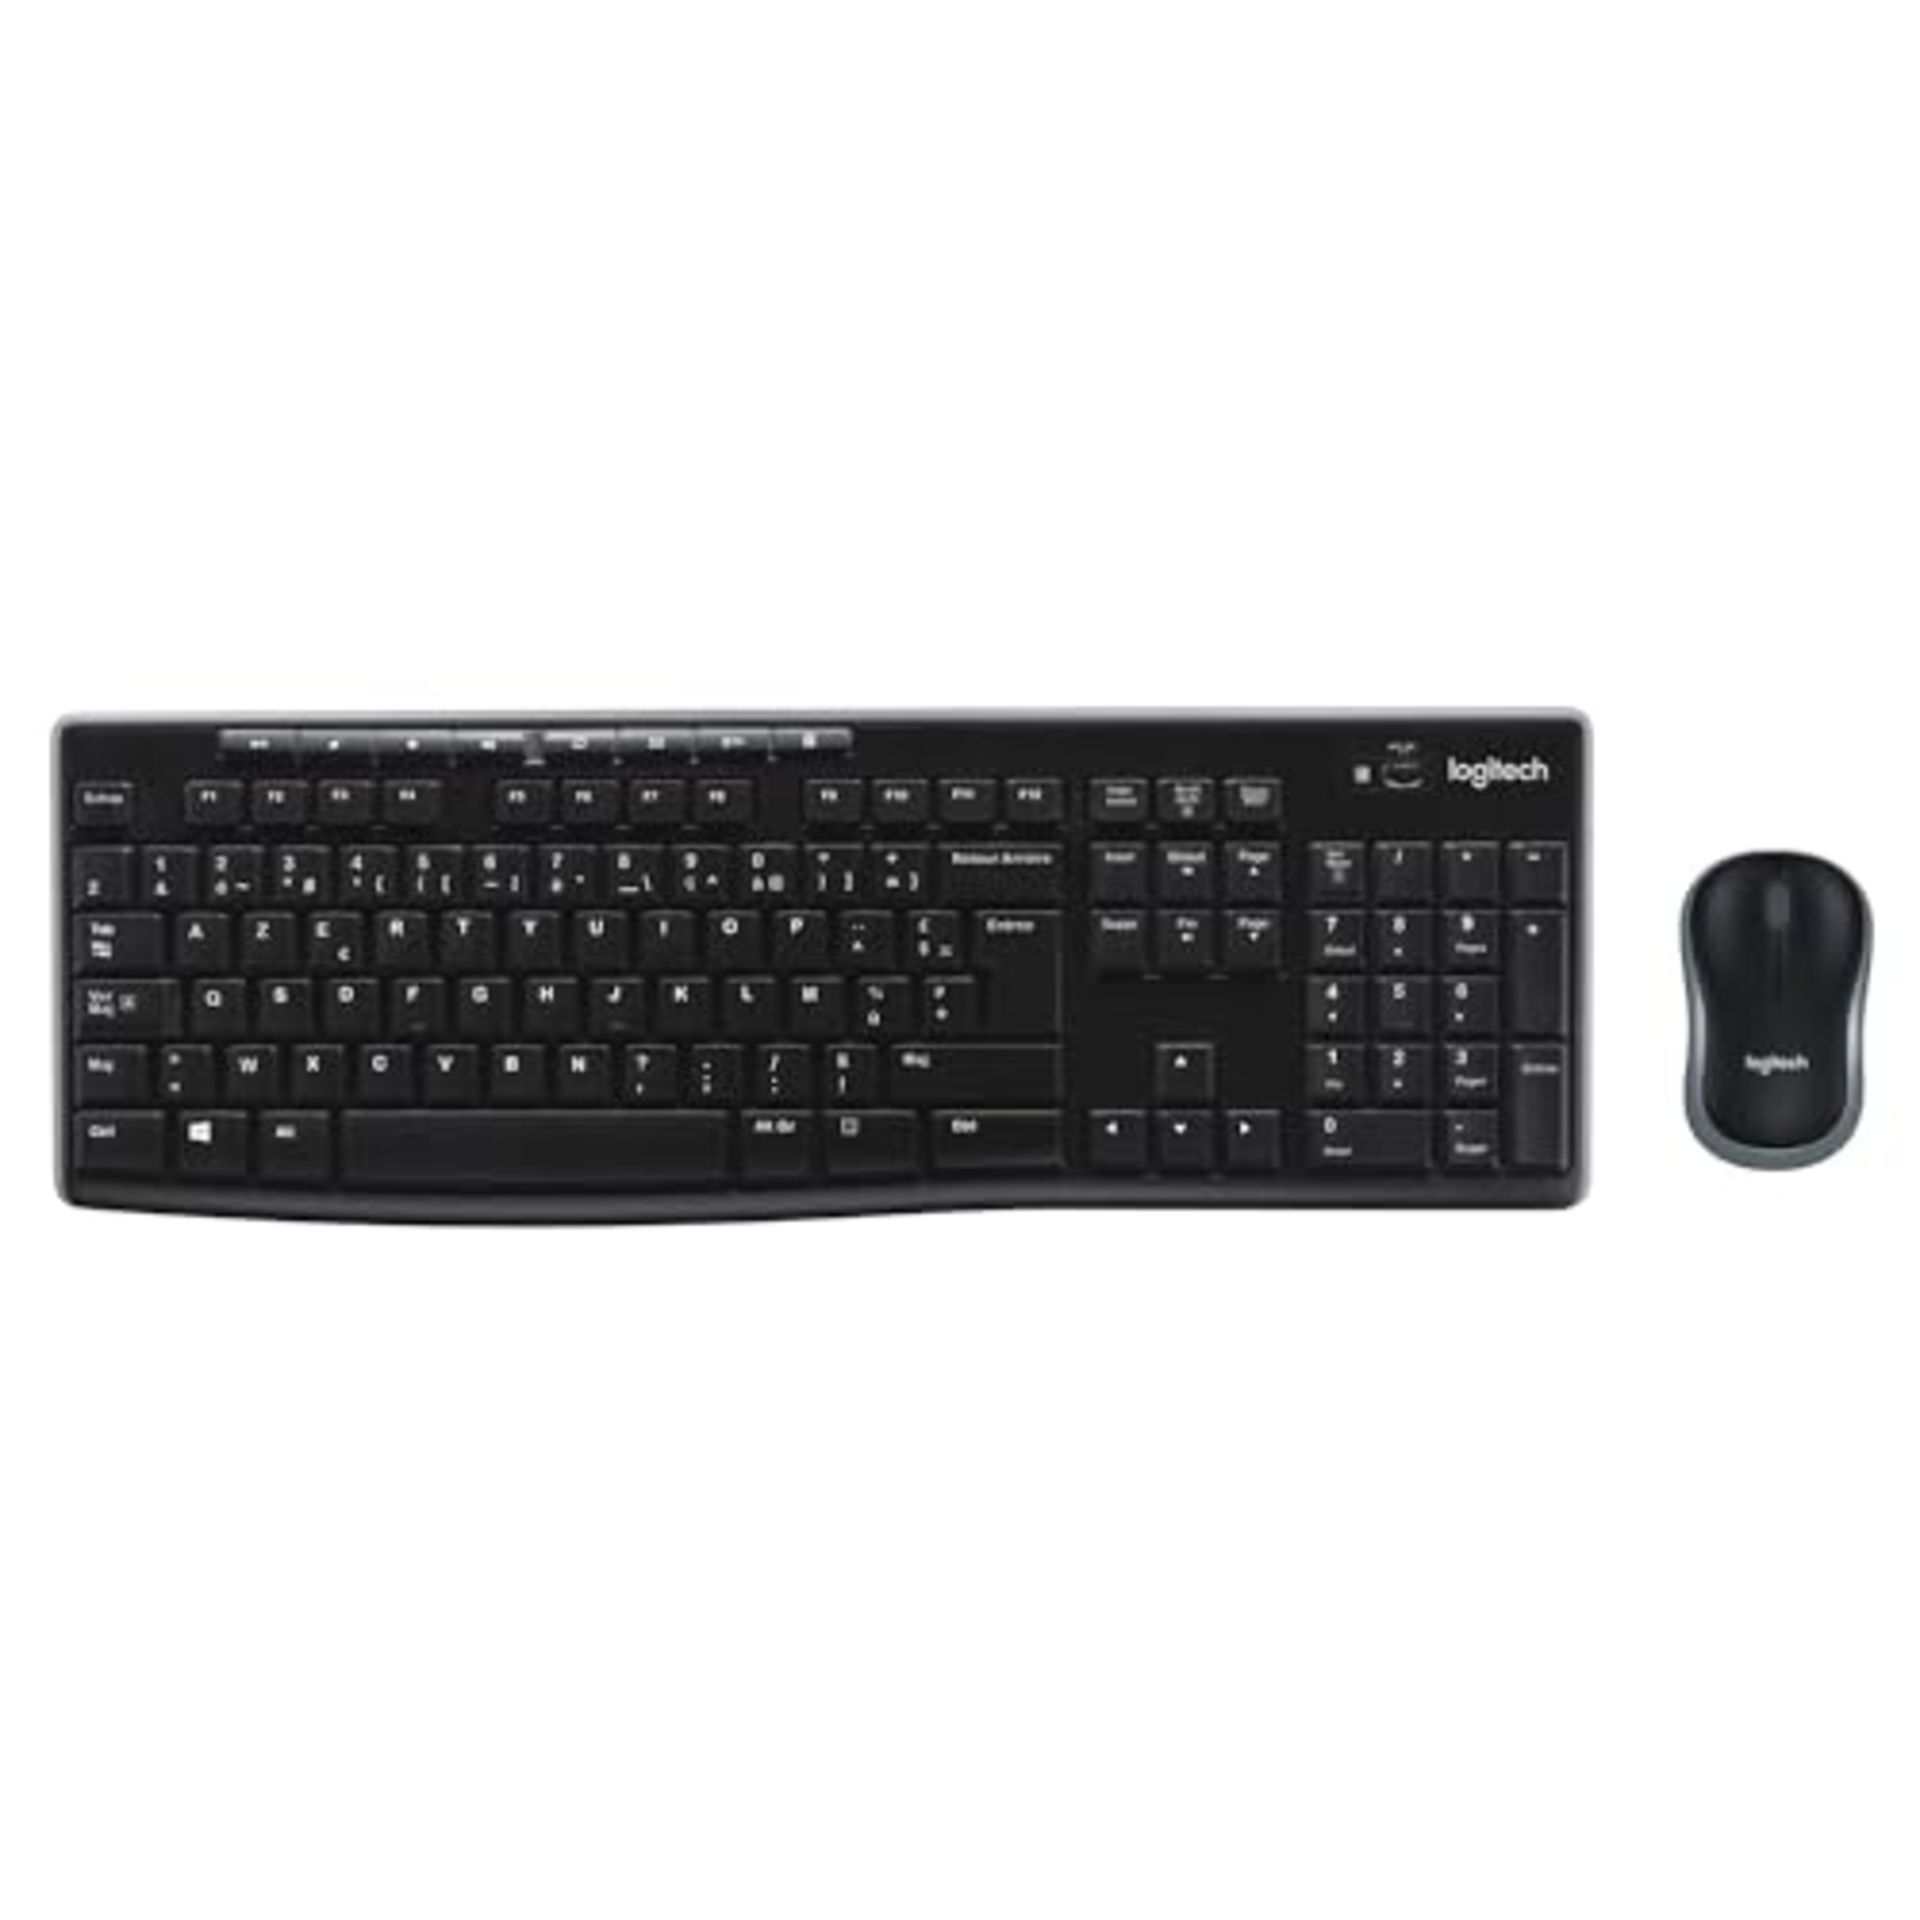 Logitech MK270 Combo Wireless Keyboard and Mouse for Windows, Wireless 2.4 GHz, Compac